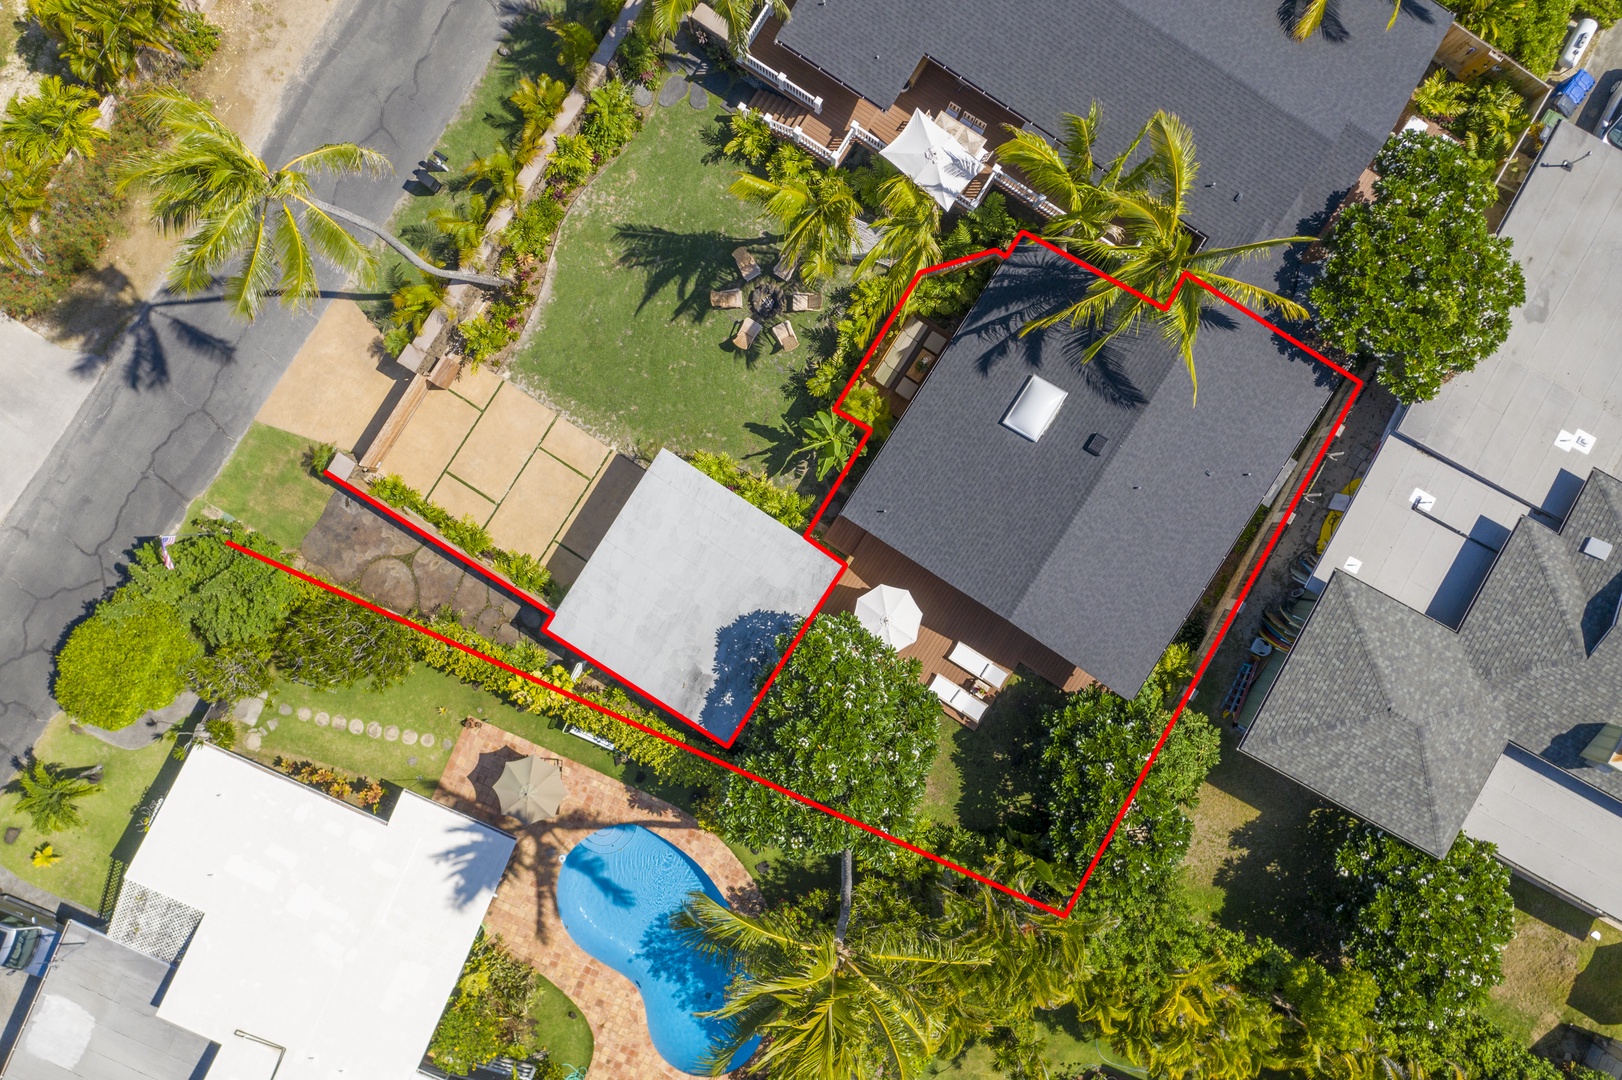 Kailua Vacation Rentals, Ranch Beach House - Ranch Beach House (outlined here) is the separate, guest house at this larger estate home